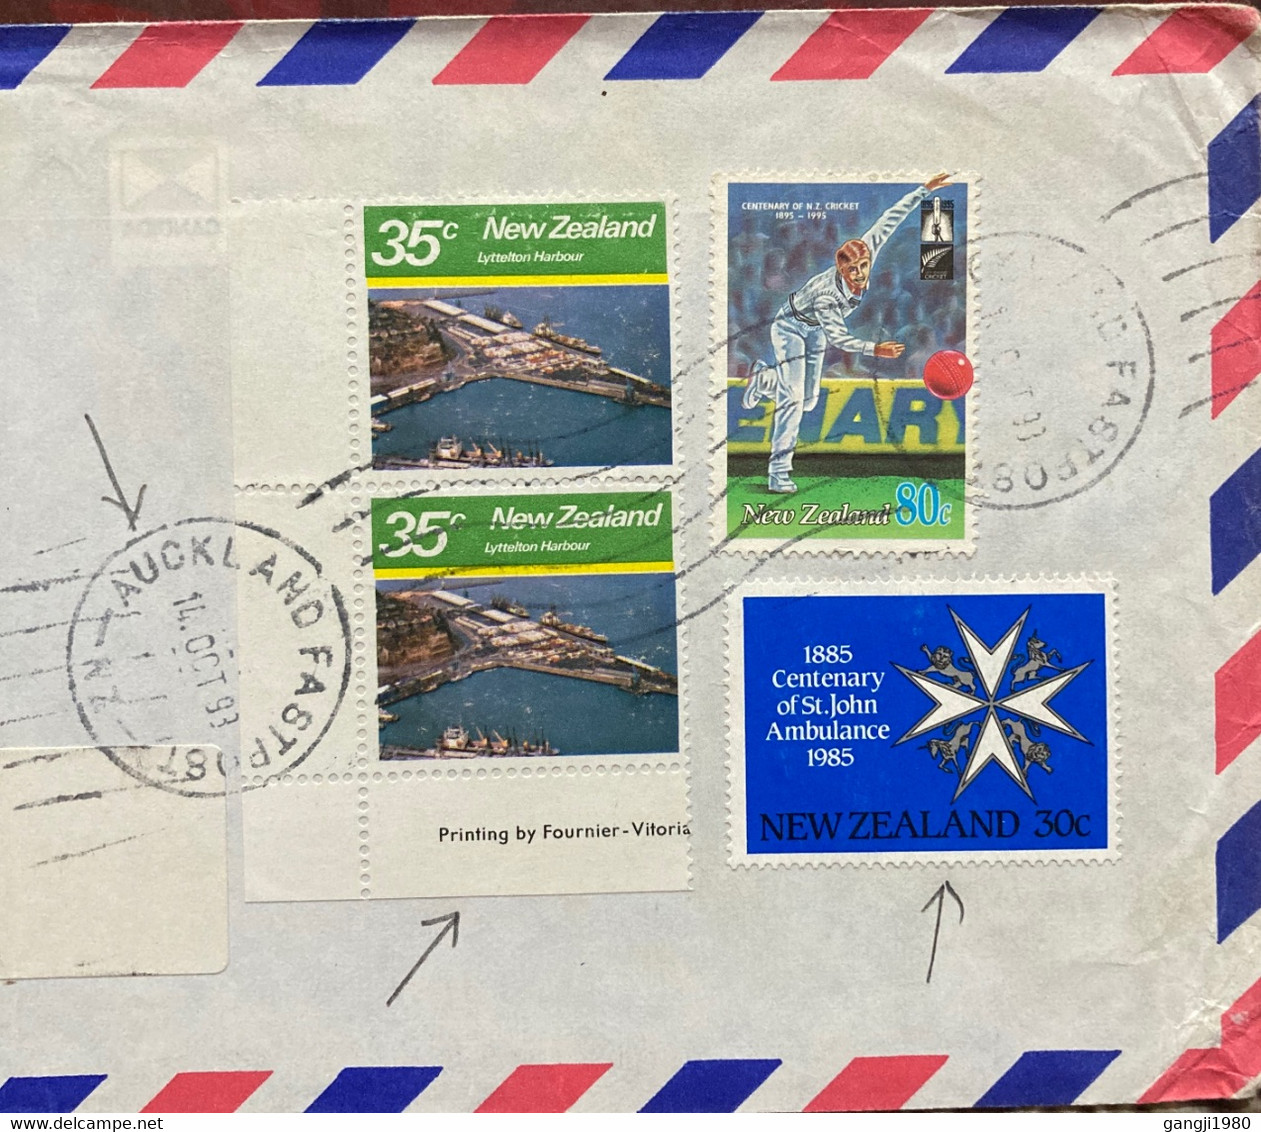 NEW ZEALAND 1985, CRICKET & AMBULANCE, HEALTH, MEDICAL, SPORT, LYTTELTON HARBOUR, AUCKLAND FAST POST CANCEL, COVER TO IN - Briefe U. Dokumente